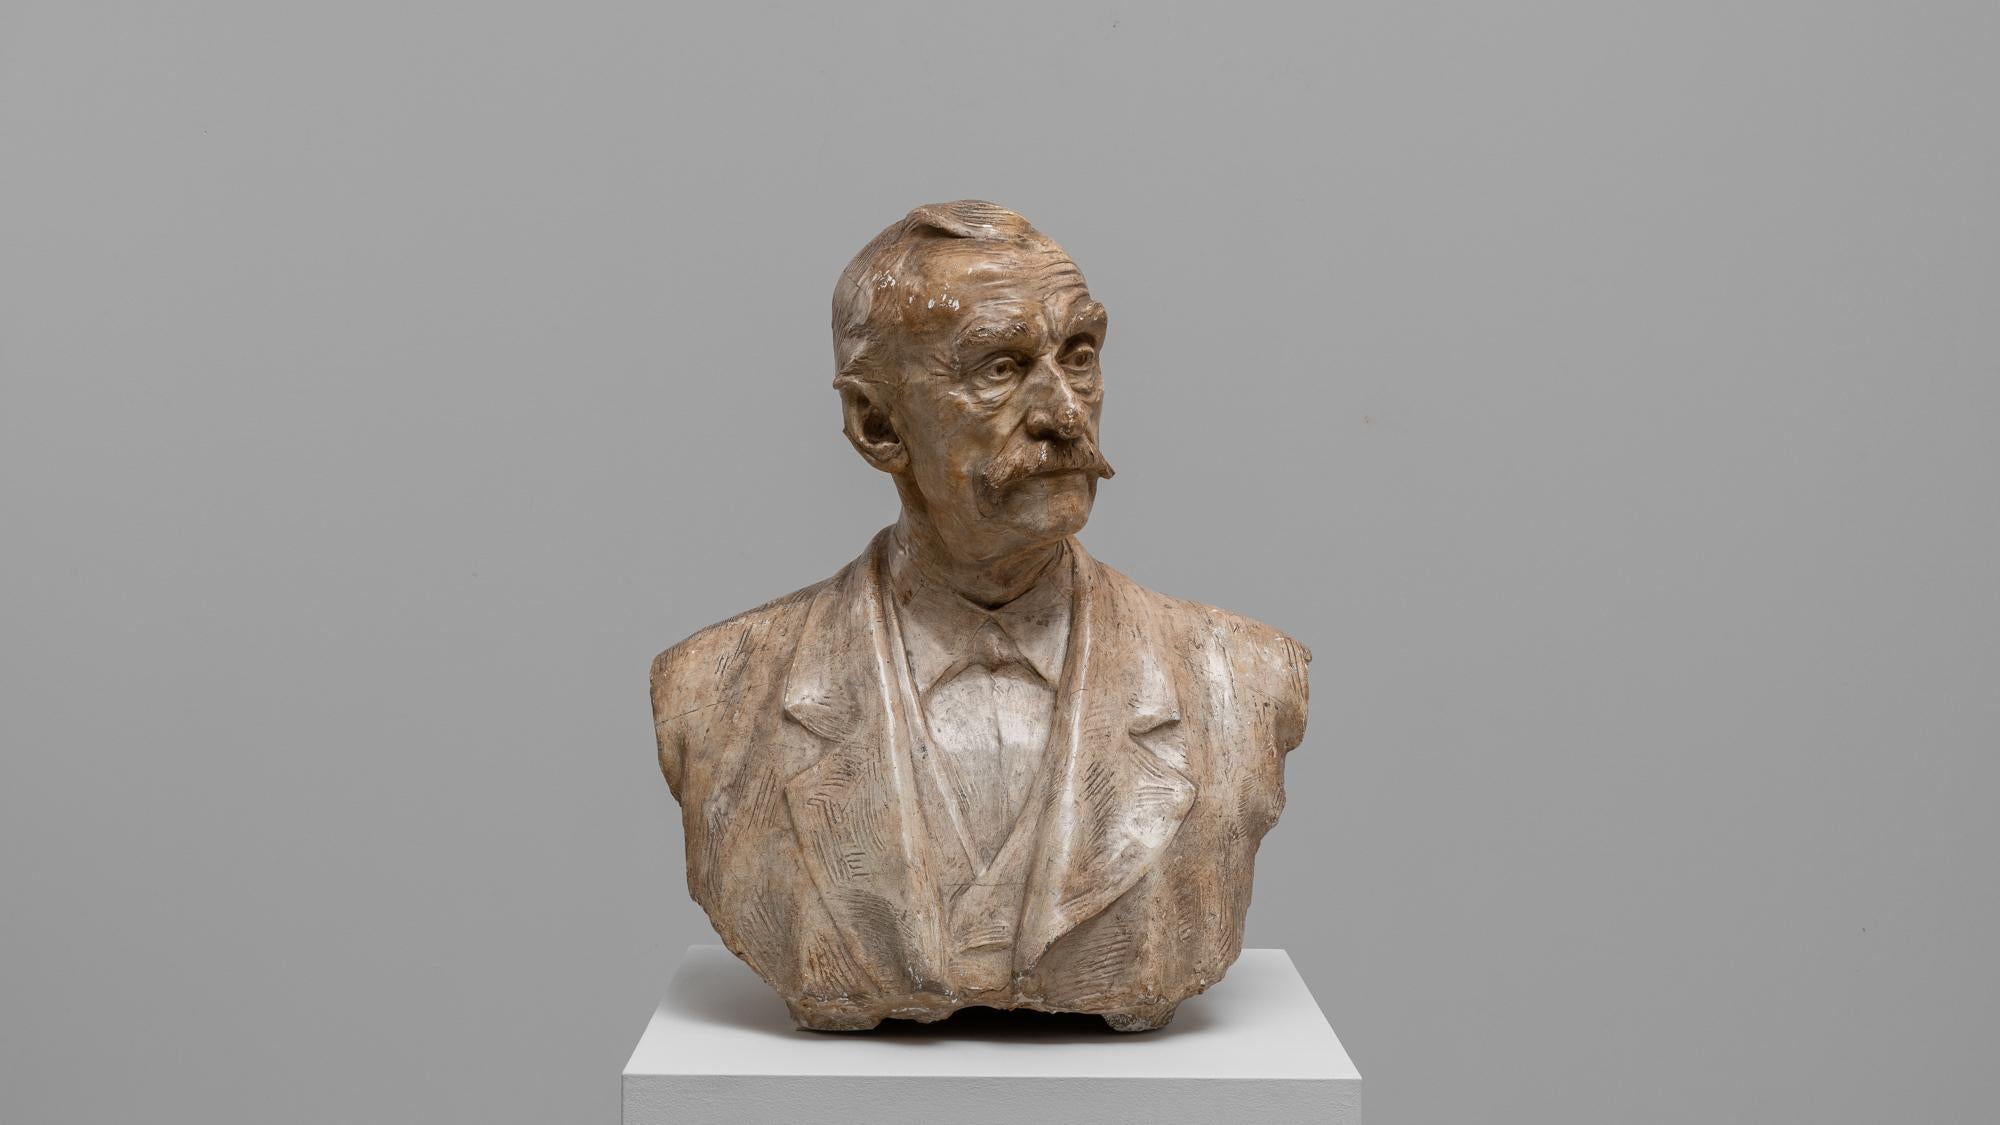 This 20th-century French concrete bust captures the essence of artistic realism with its meticulously detailed portrayal of an elder gentleman. The sculpture, characterized by its textured surface and lifelike expression, depicts the subject with